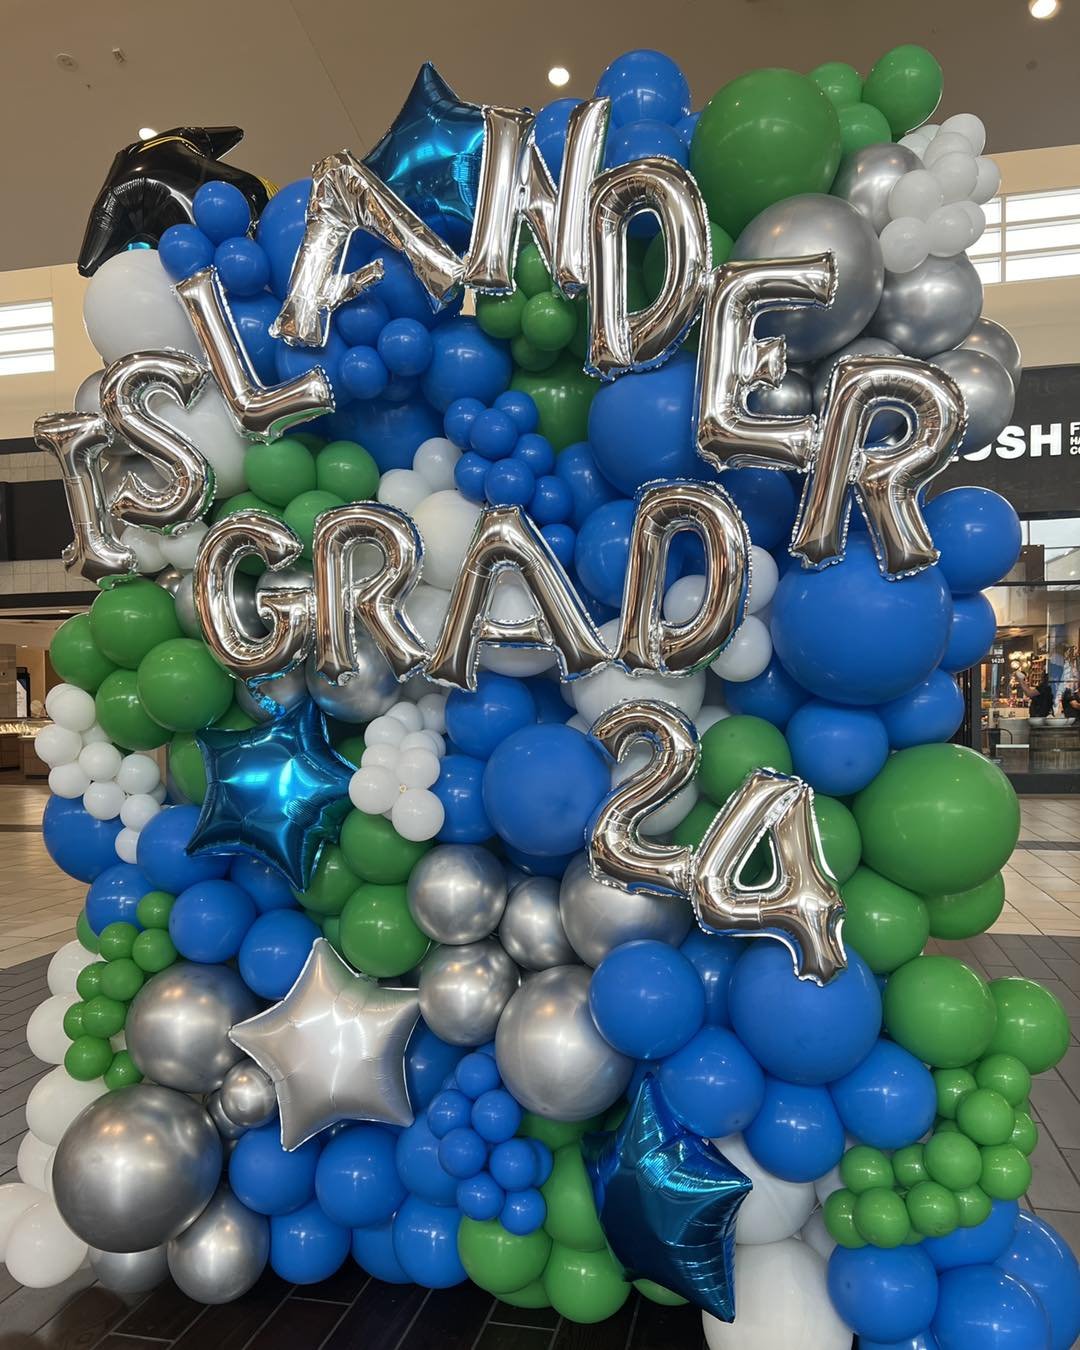 Congrats to all the Texas A&amp;M University-Corpus Christi grads! Come take a pic at our Islander 🤙 balloon wall to celebrate this amazing milestone. Tag us to share your photo! 📸🎓 @island_university @go_islanders @islander_alumni